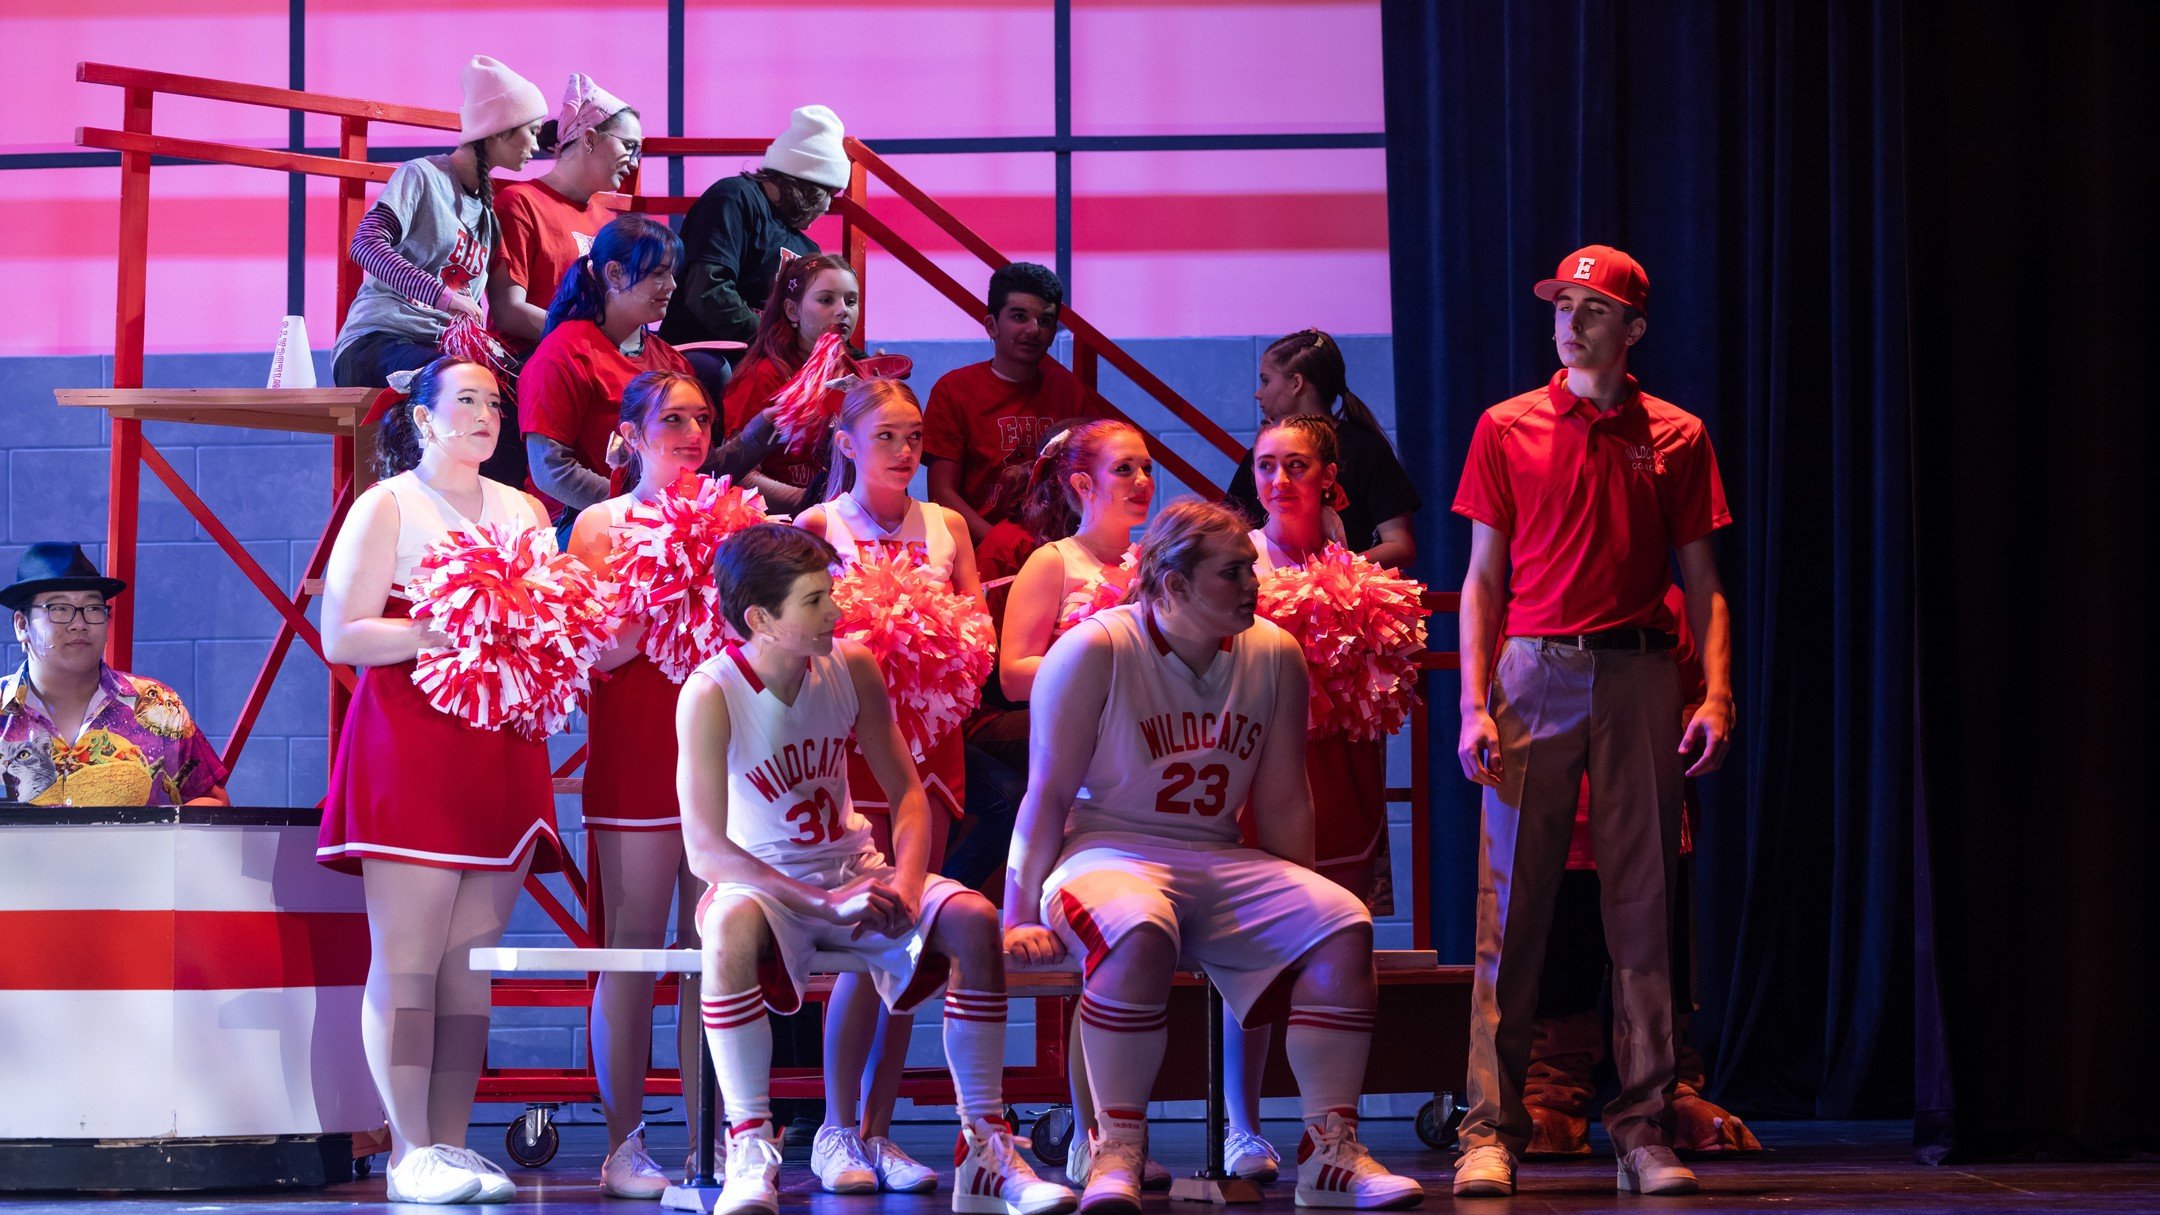 If you didn't have the chance to enjoy Disney's High School Musical on Stage last weekend, you are in luck. There are still 3 performances left. Go to Brightonmusical.com for tickets today.
Photos by @shilessnerphoto